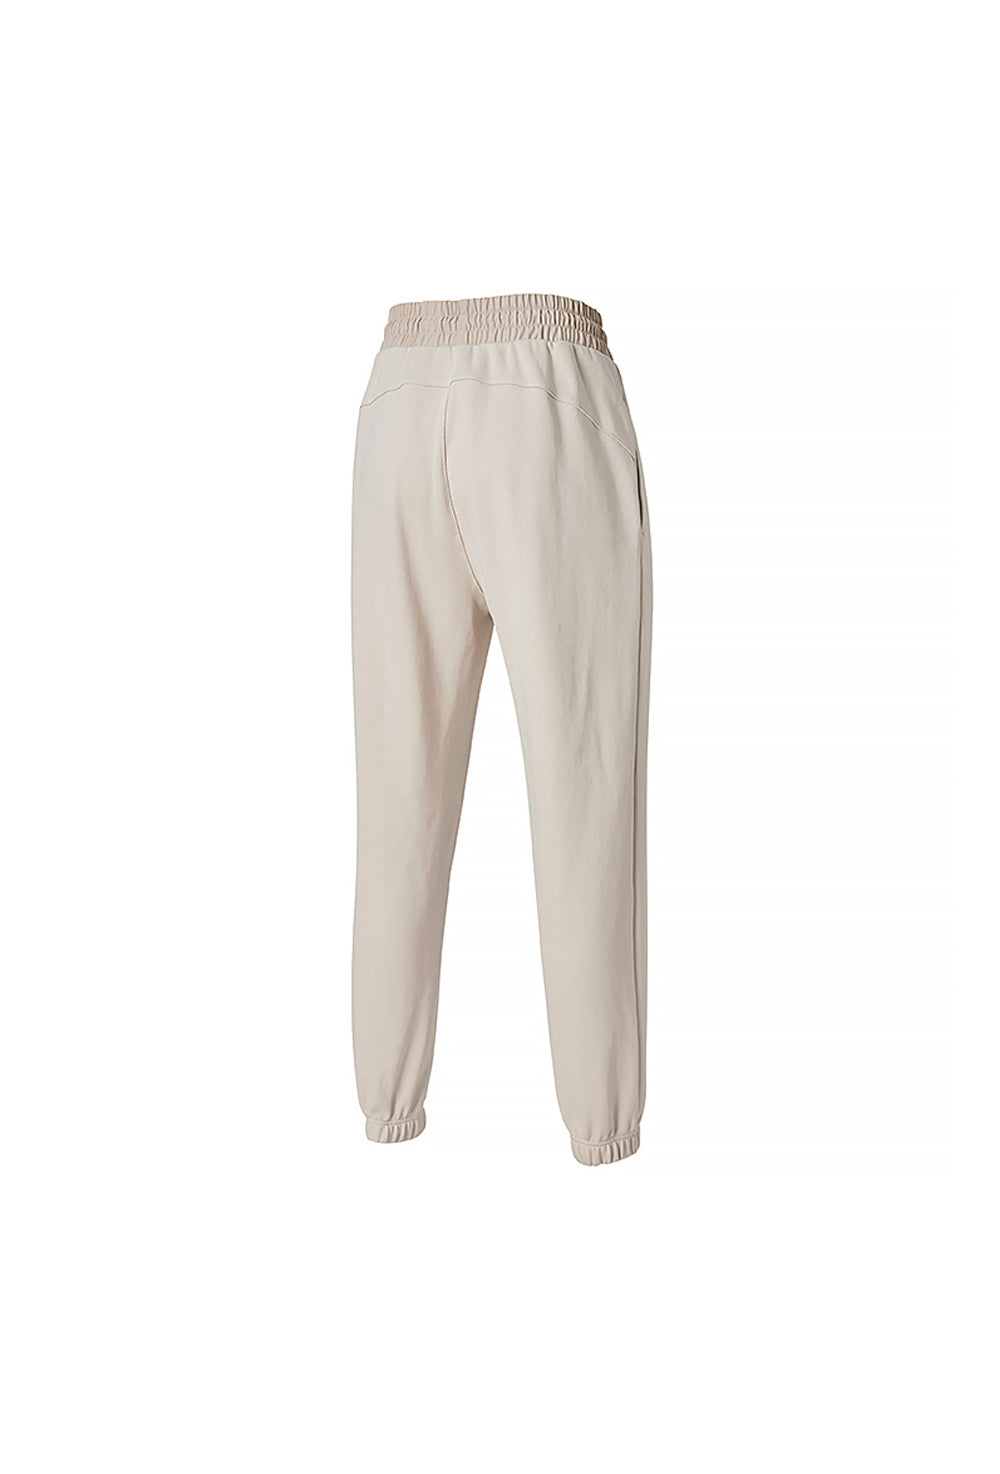 Woven Mix Jogger Pants - Shimmer Beige (Clearance)